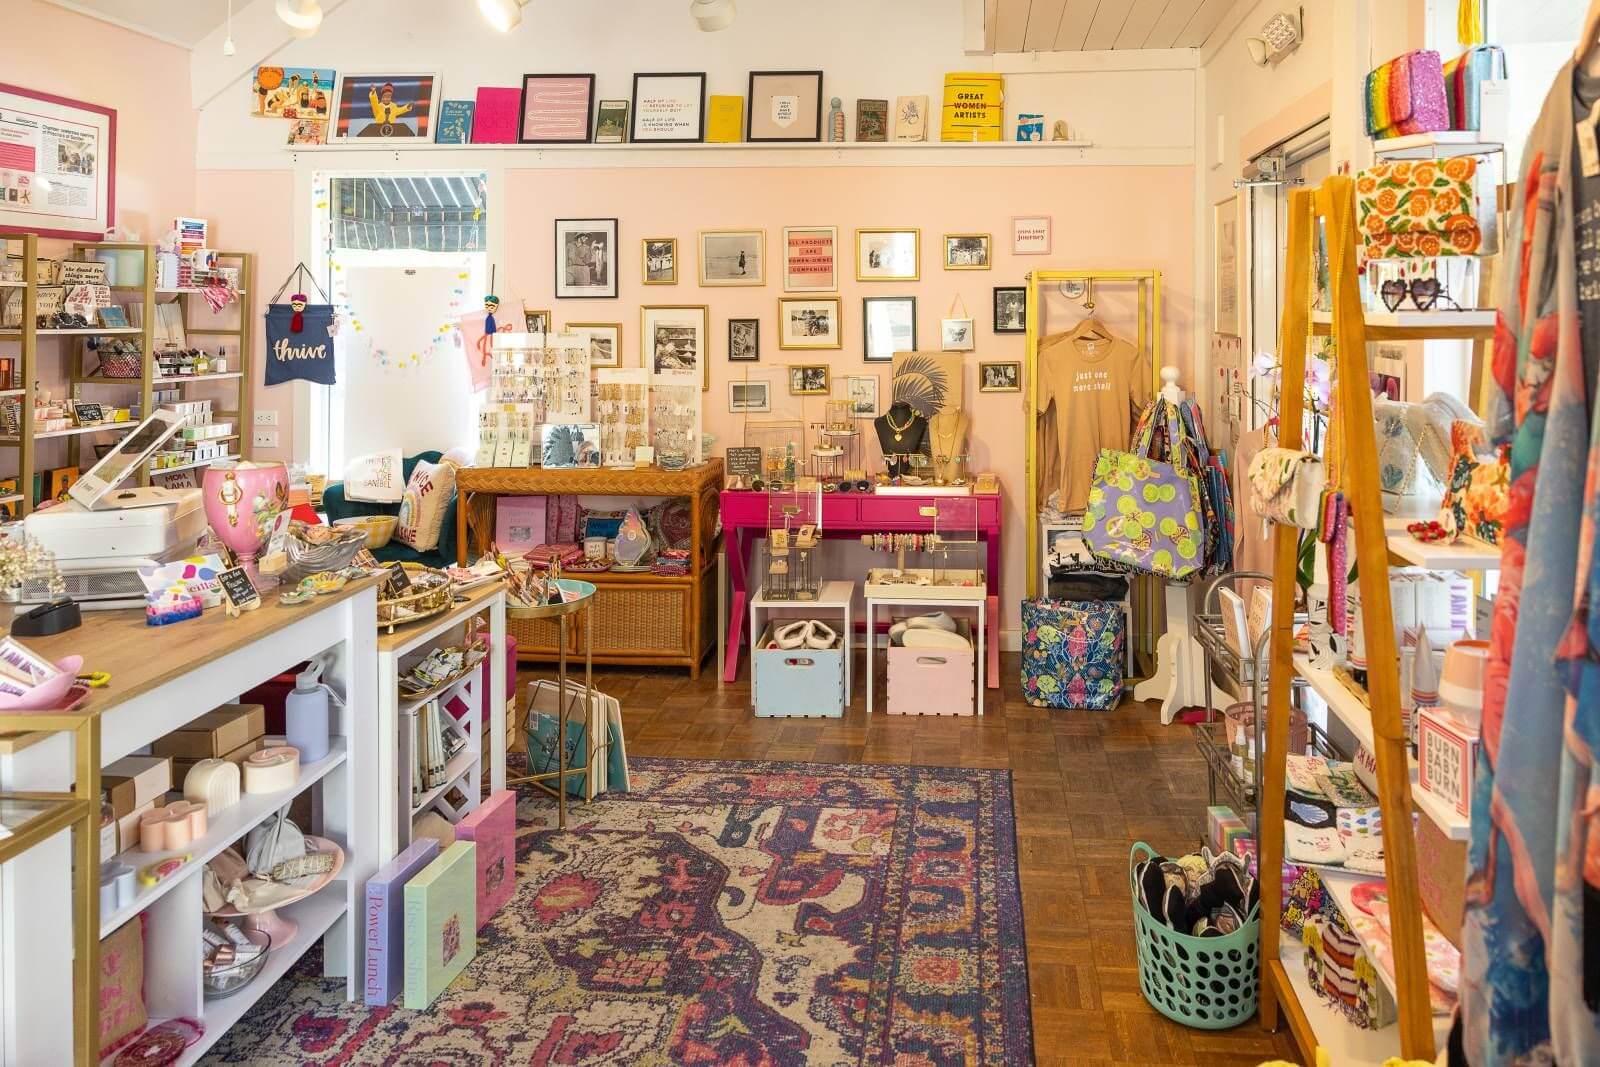 Priscilla's of Sanibel Sanibel Island gift shop and boutique specializes in handmade empowering gifts made by women for women of all ages, from infants to adults. Must Do Visitor Guides